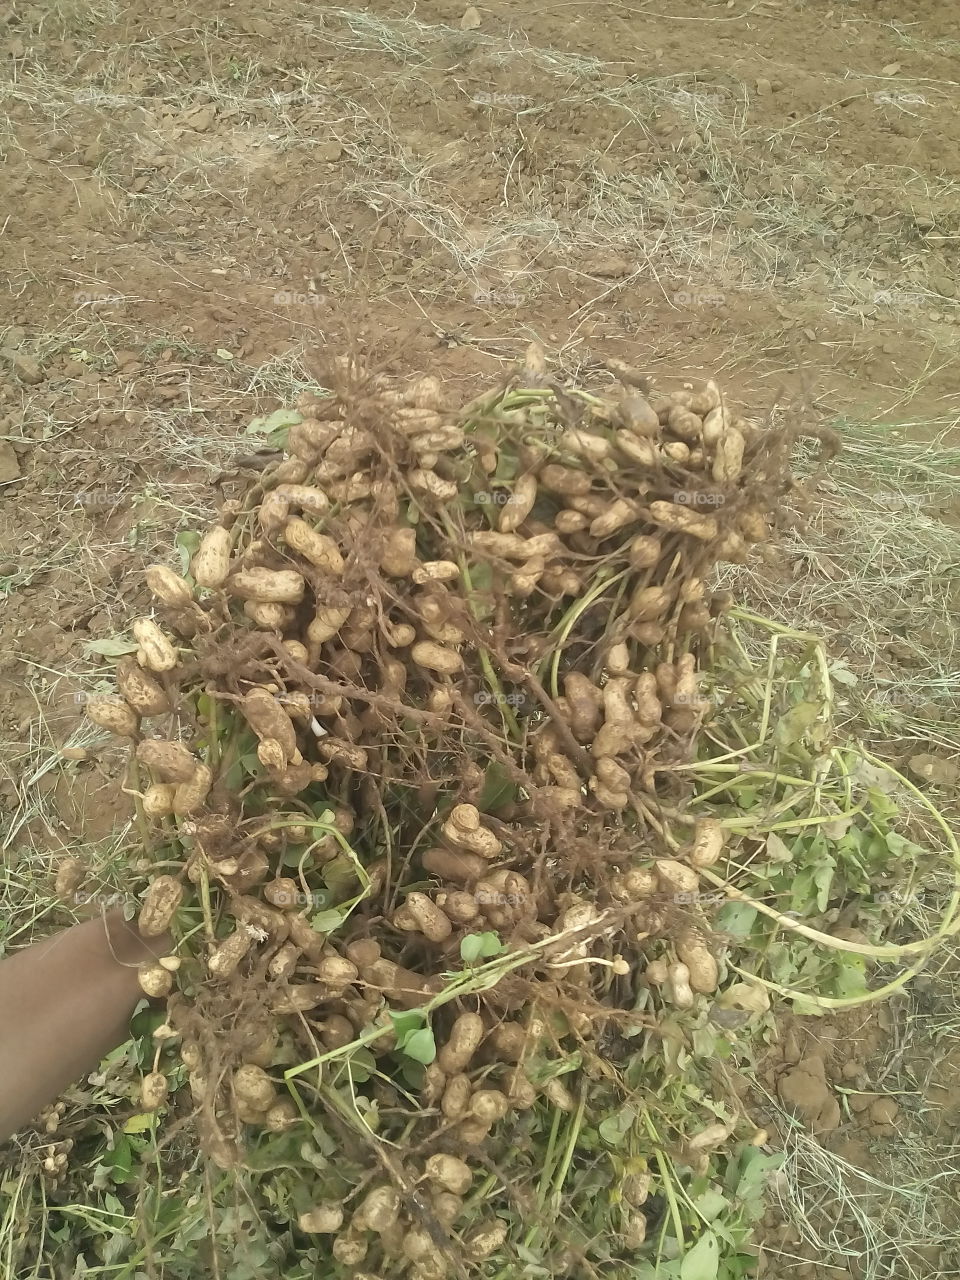 the groundnut place of my farm.